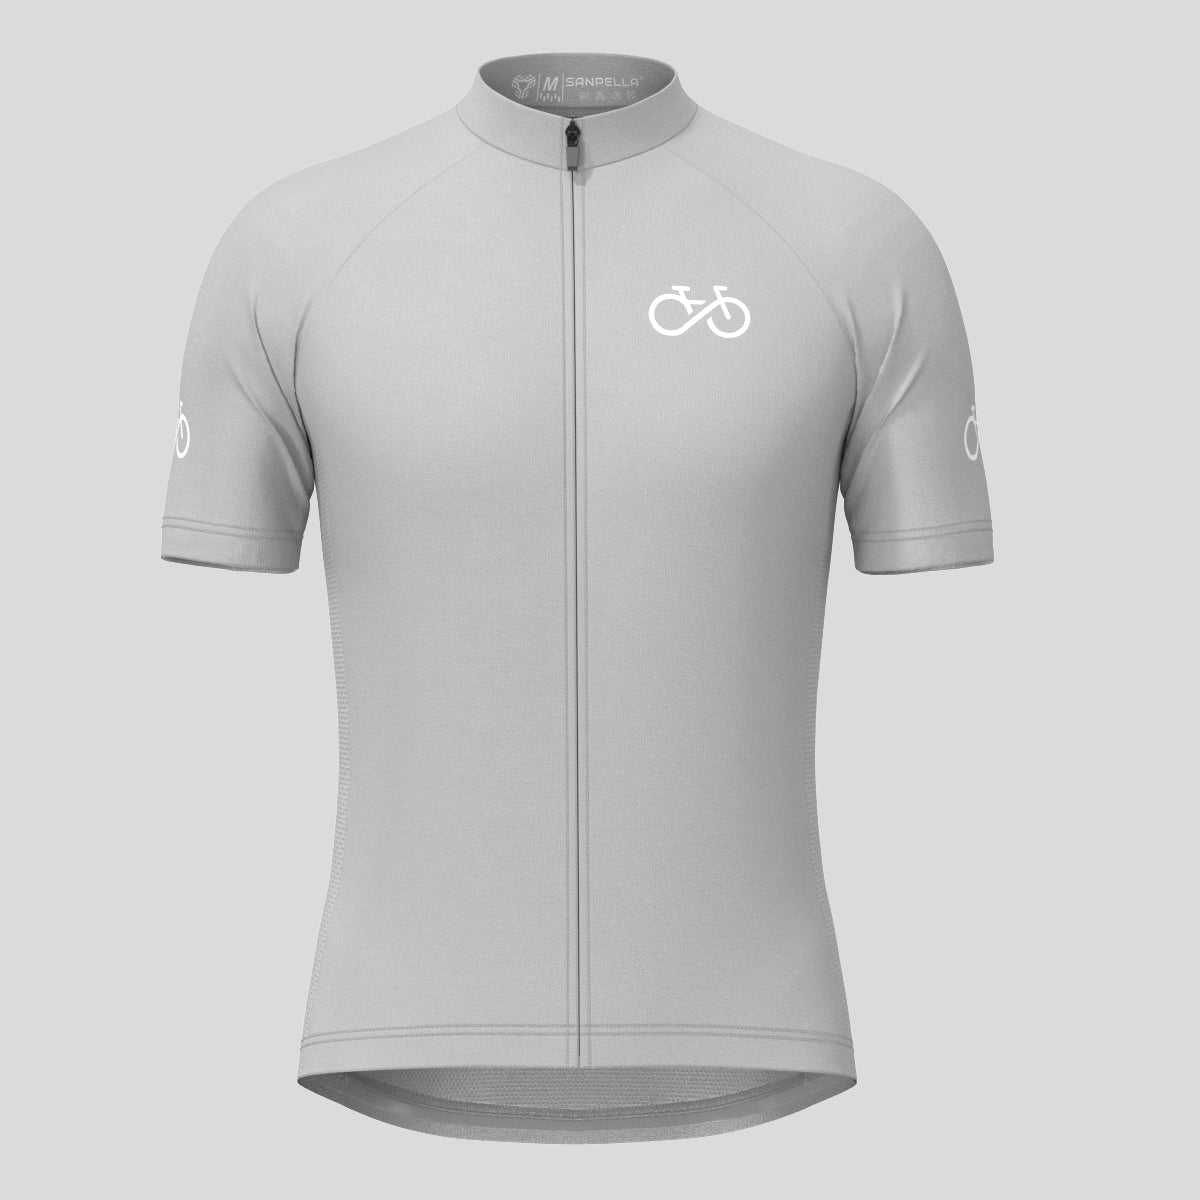 Ride Forever Men's Cycling Jersey -Gray